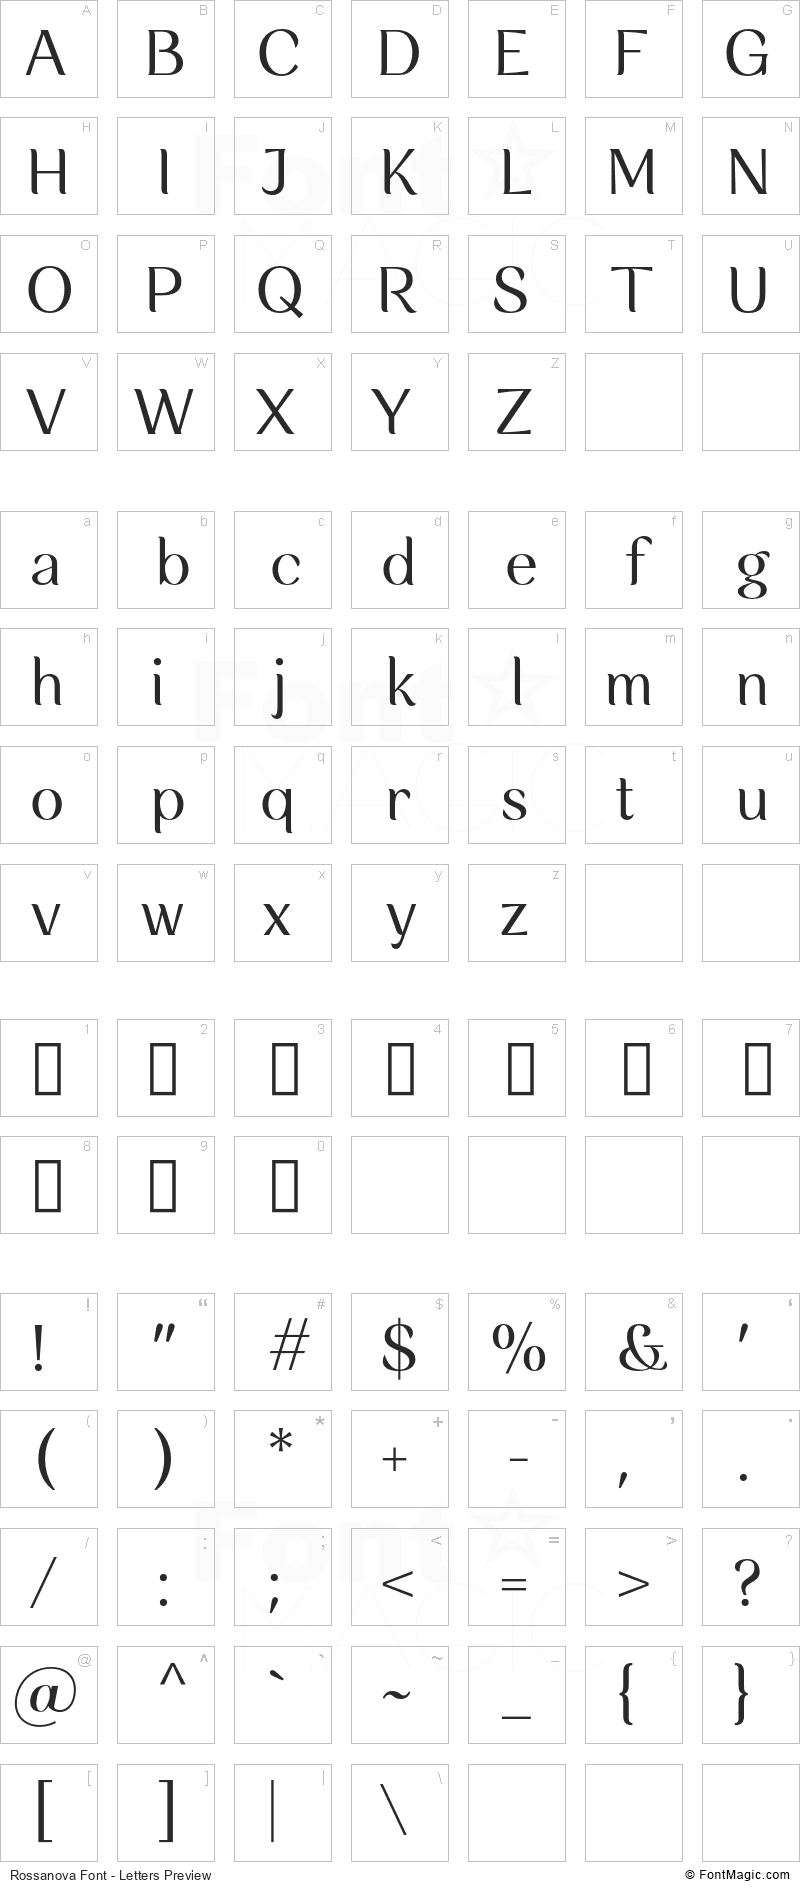 Rossanova Font - All Latters Preview Chart